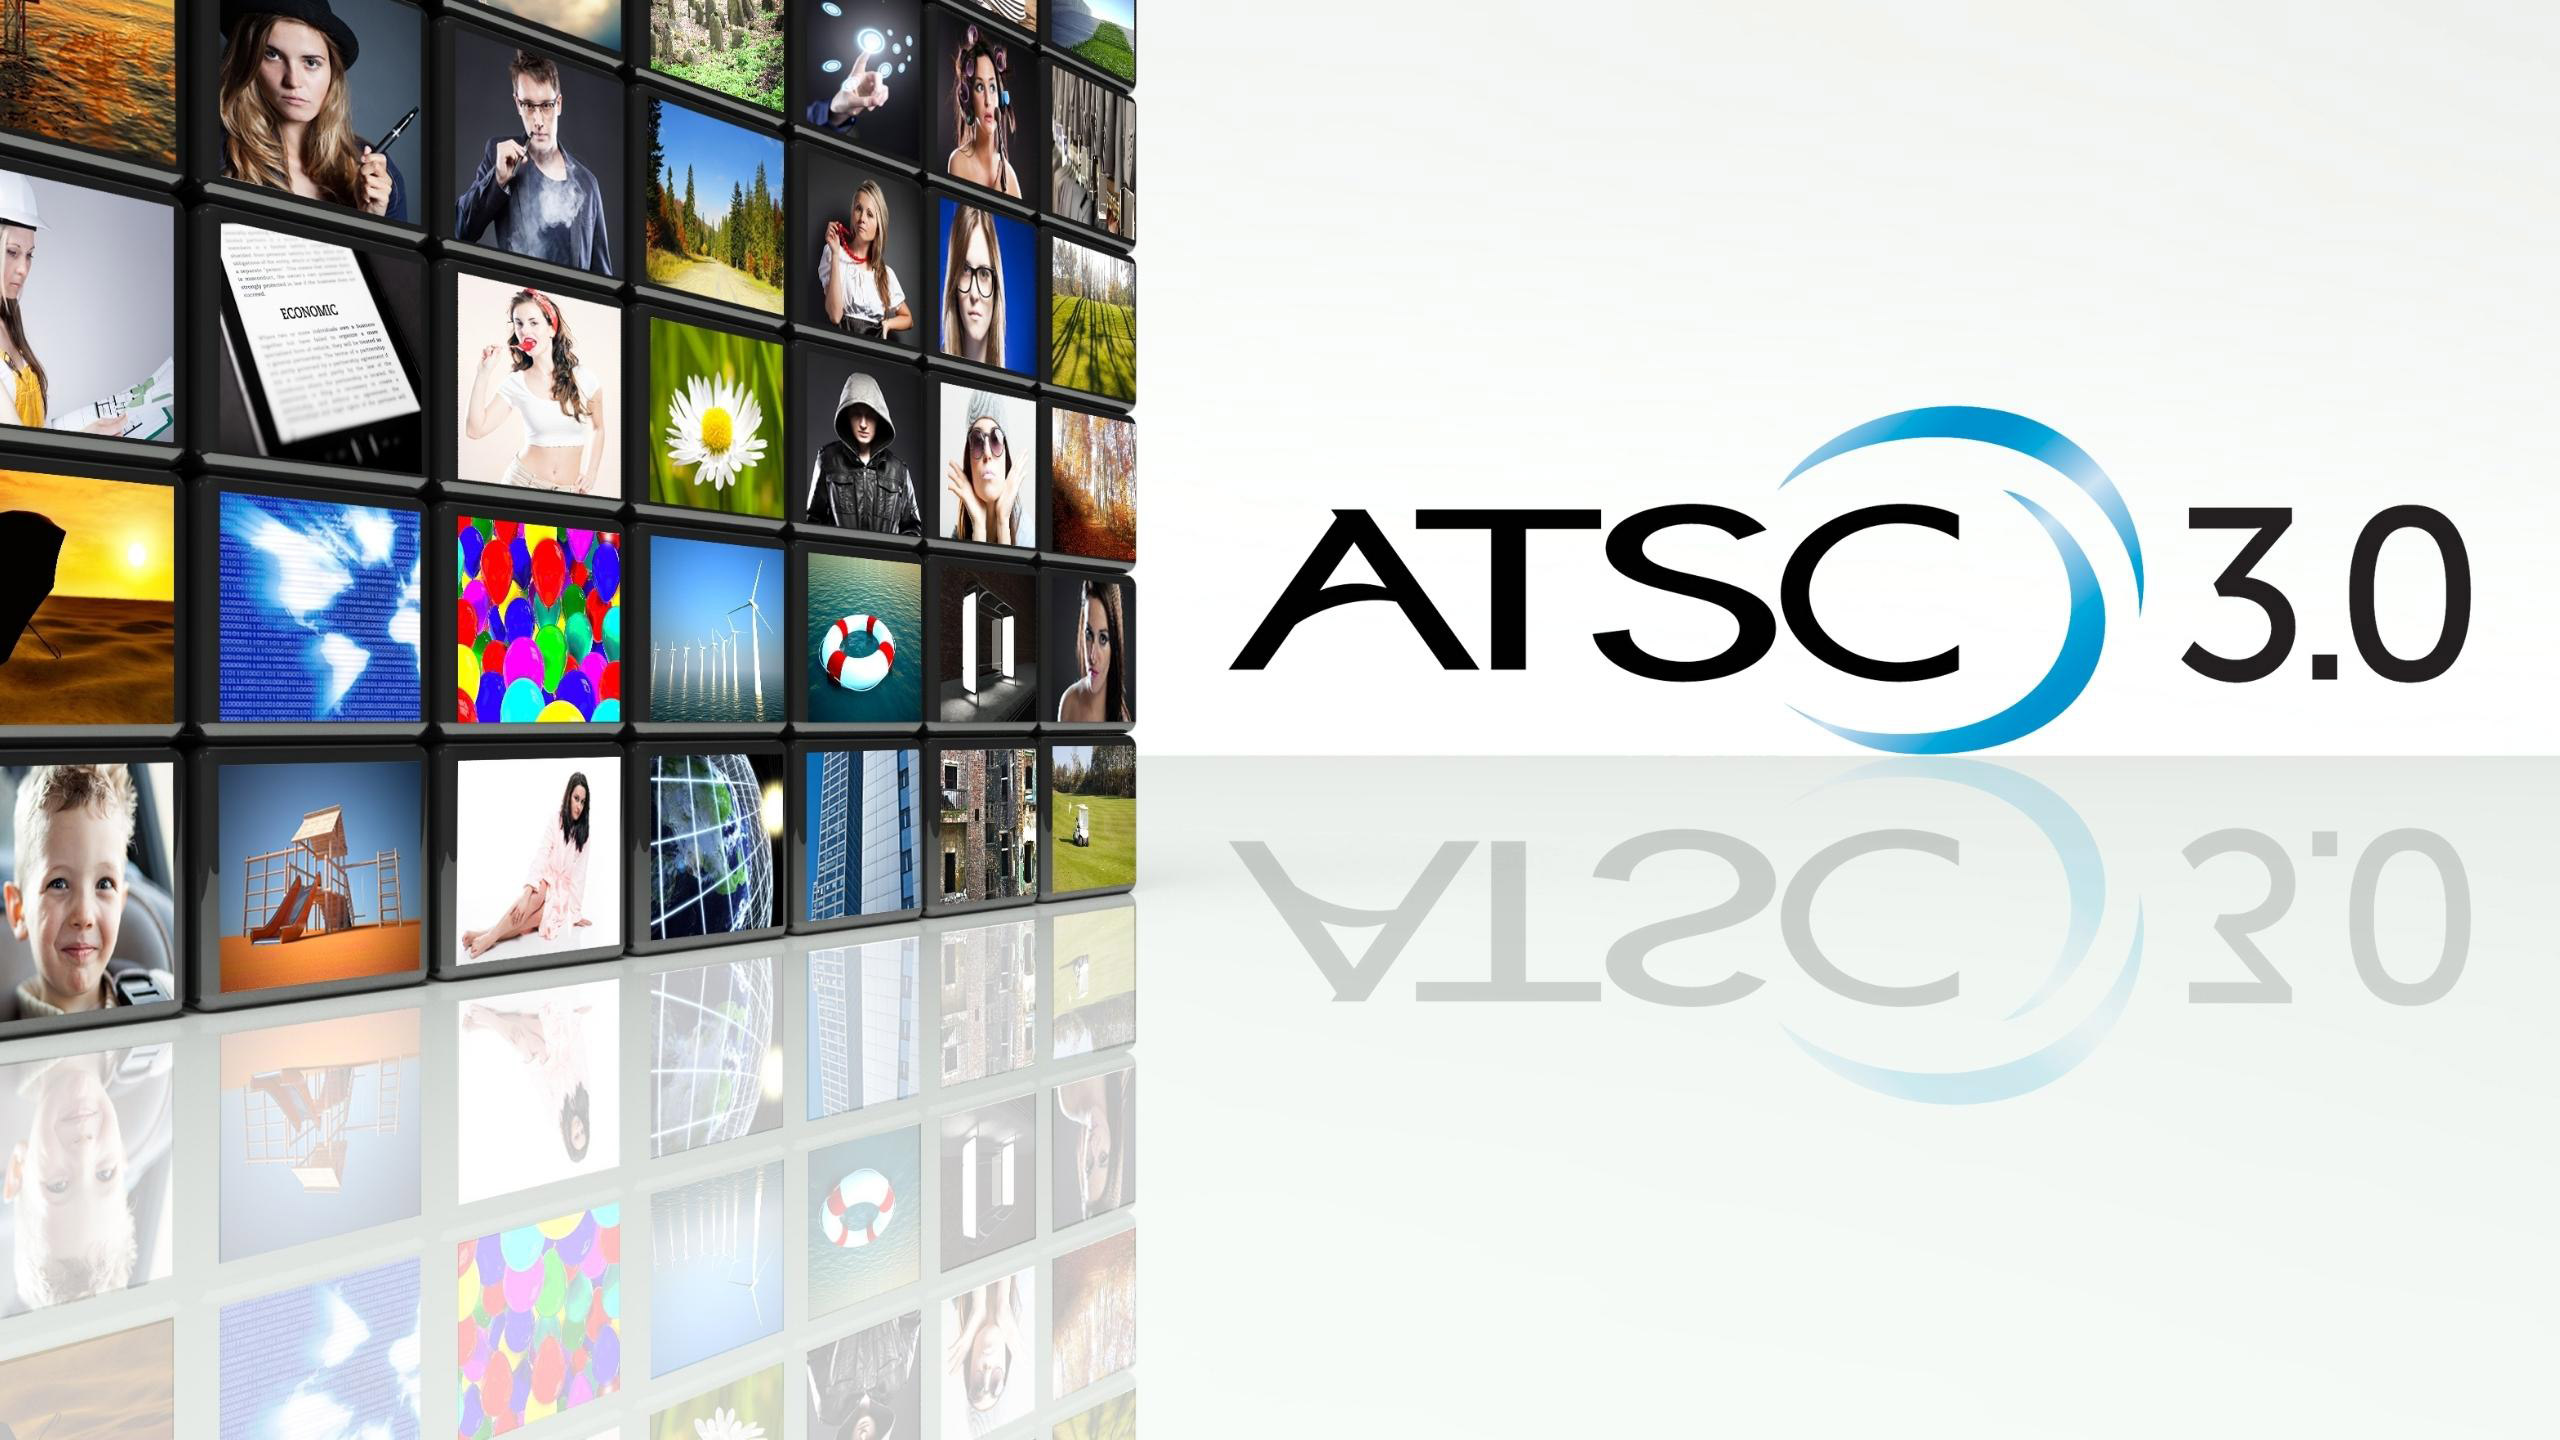  FIRST U.S. EXPERIMENTAL ATSC 3.0 LICENSE, SIX YEARS LATER